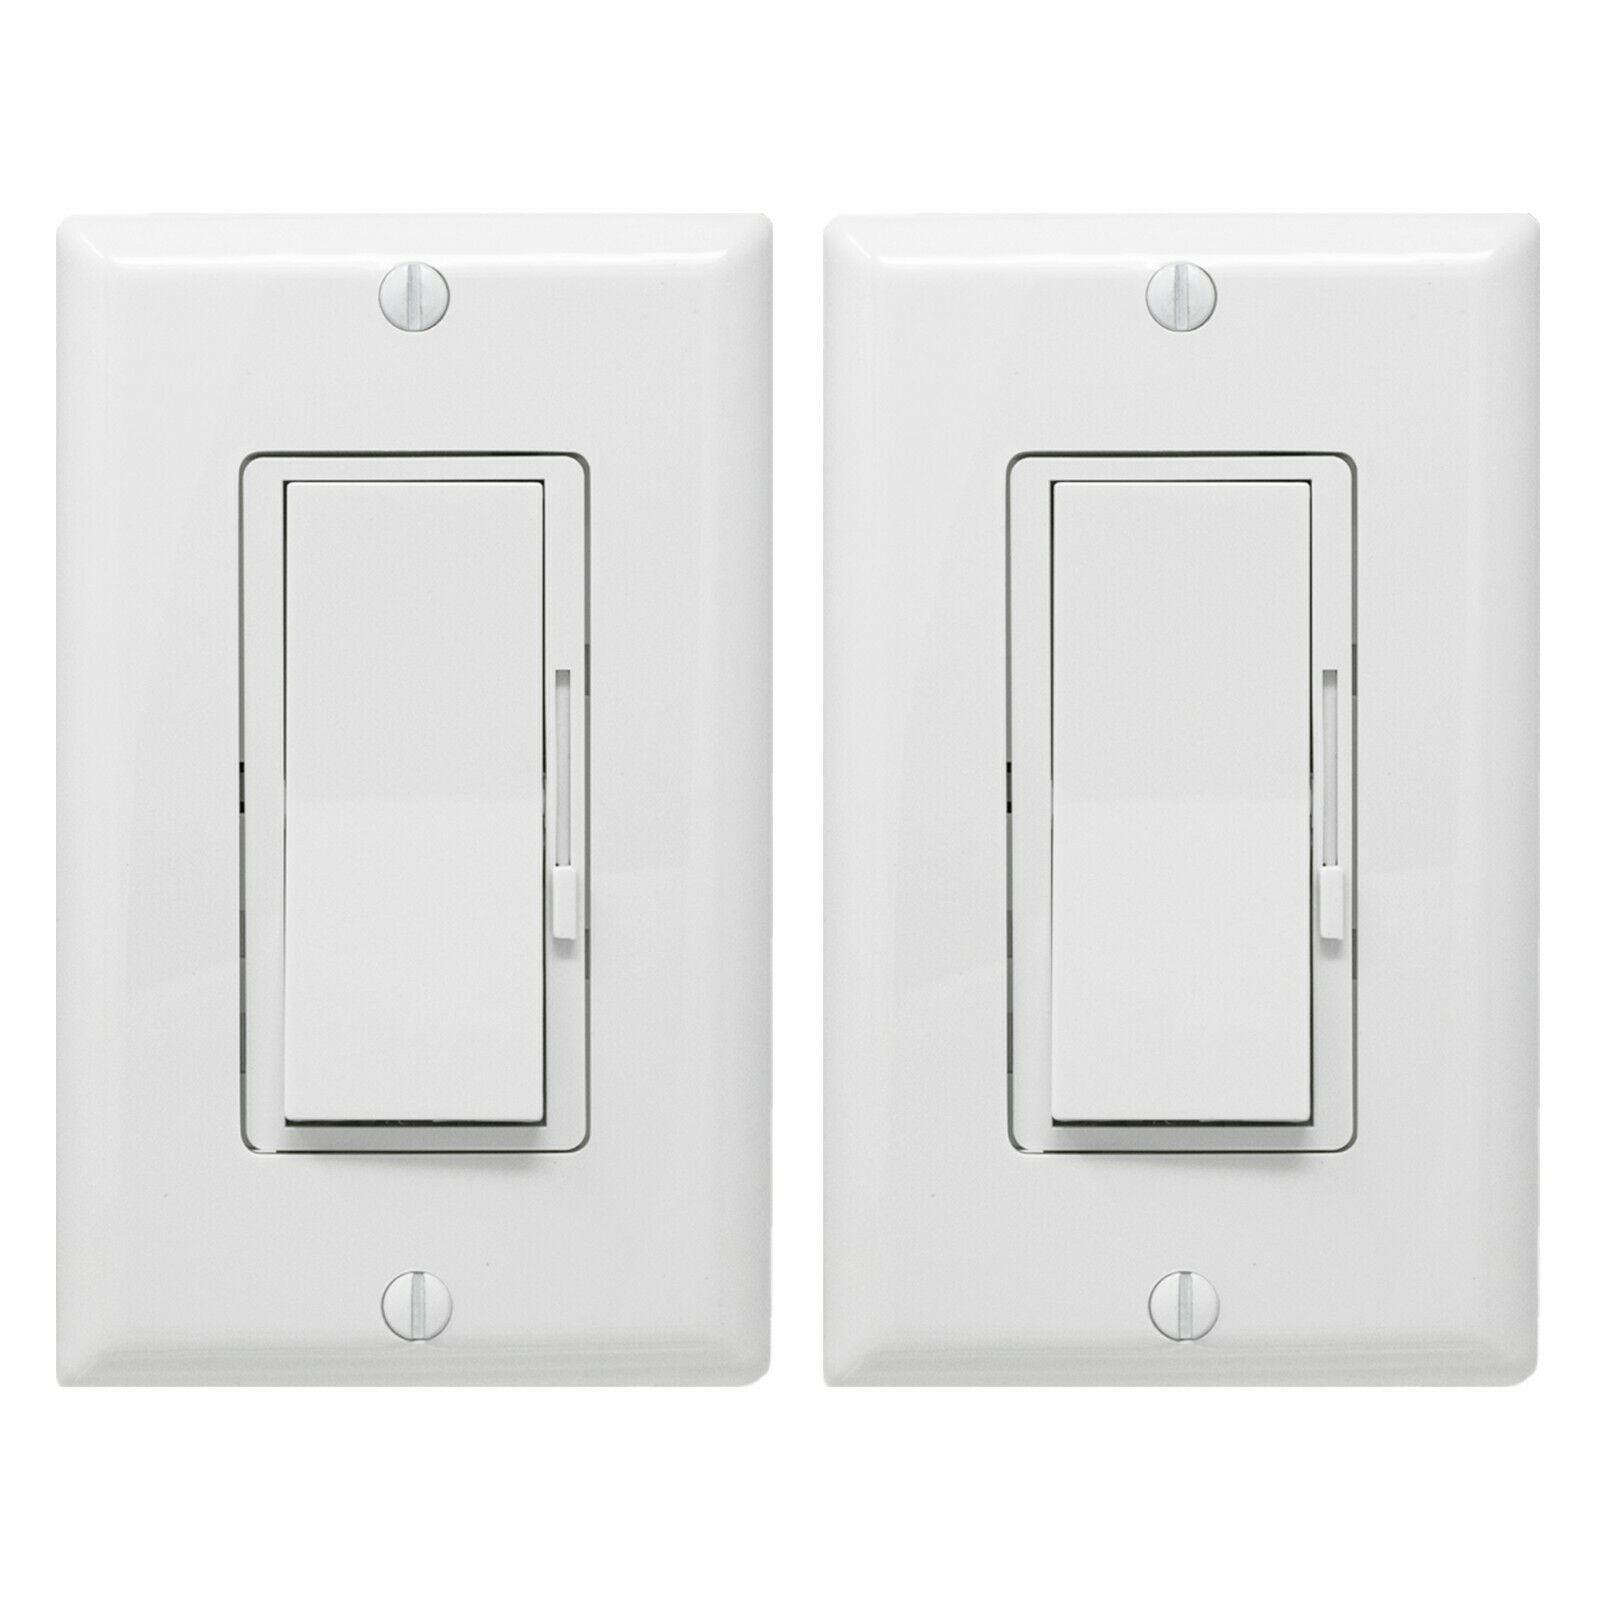 [2-pack] Dimmer Light Switch- Single Pole Or 3-way For Led /incandescent/ Cfl